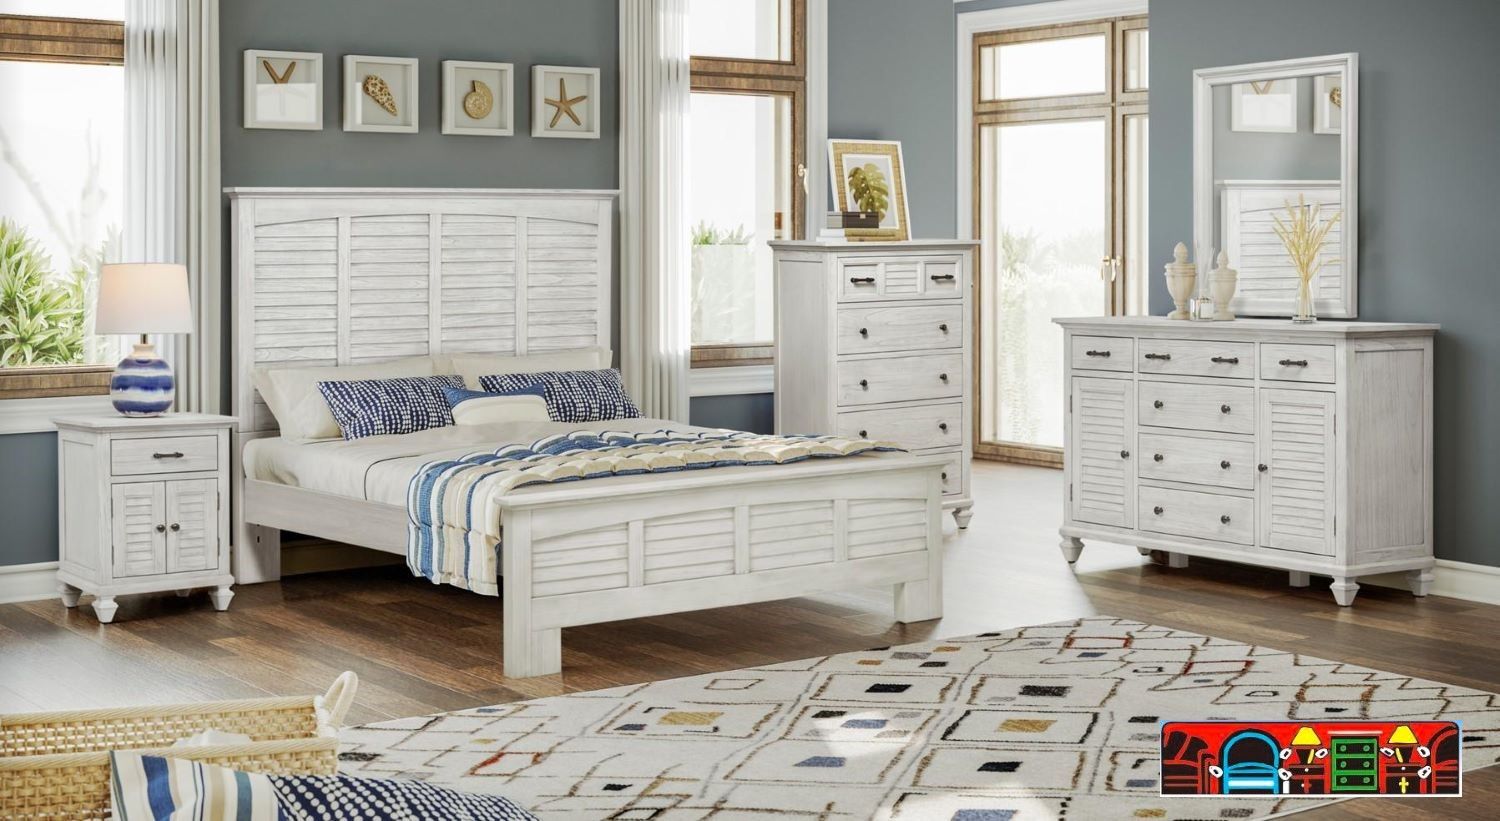 The Surfside bedroom group, featuring weathered white wood with louver accents, is available for sale in Fort Myers, FL, at Bratz-CFW.